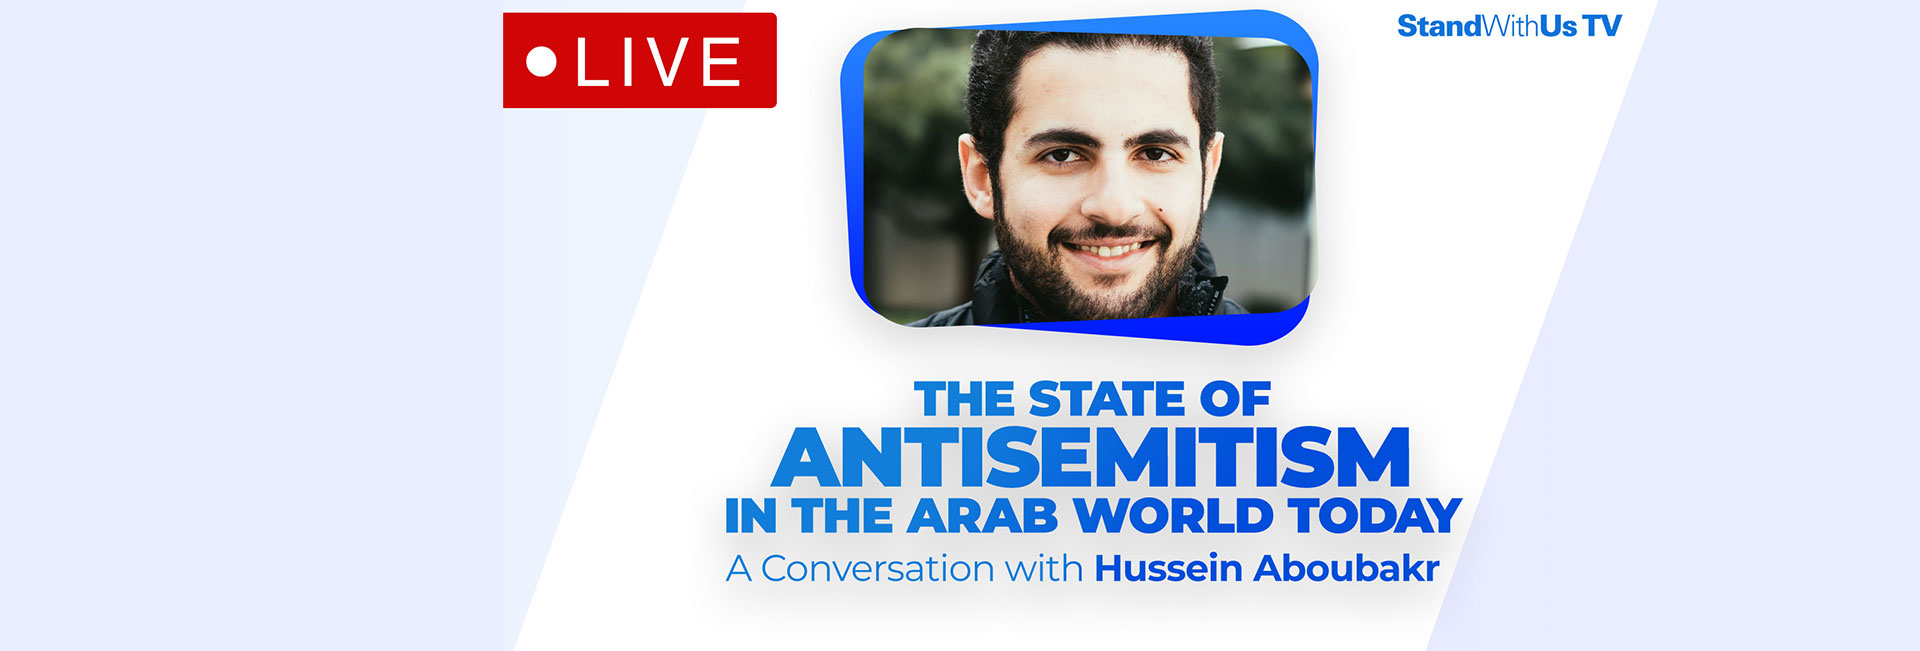 The State of Antisemitism in the Arab world today